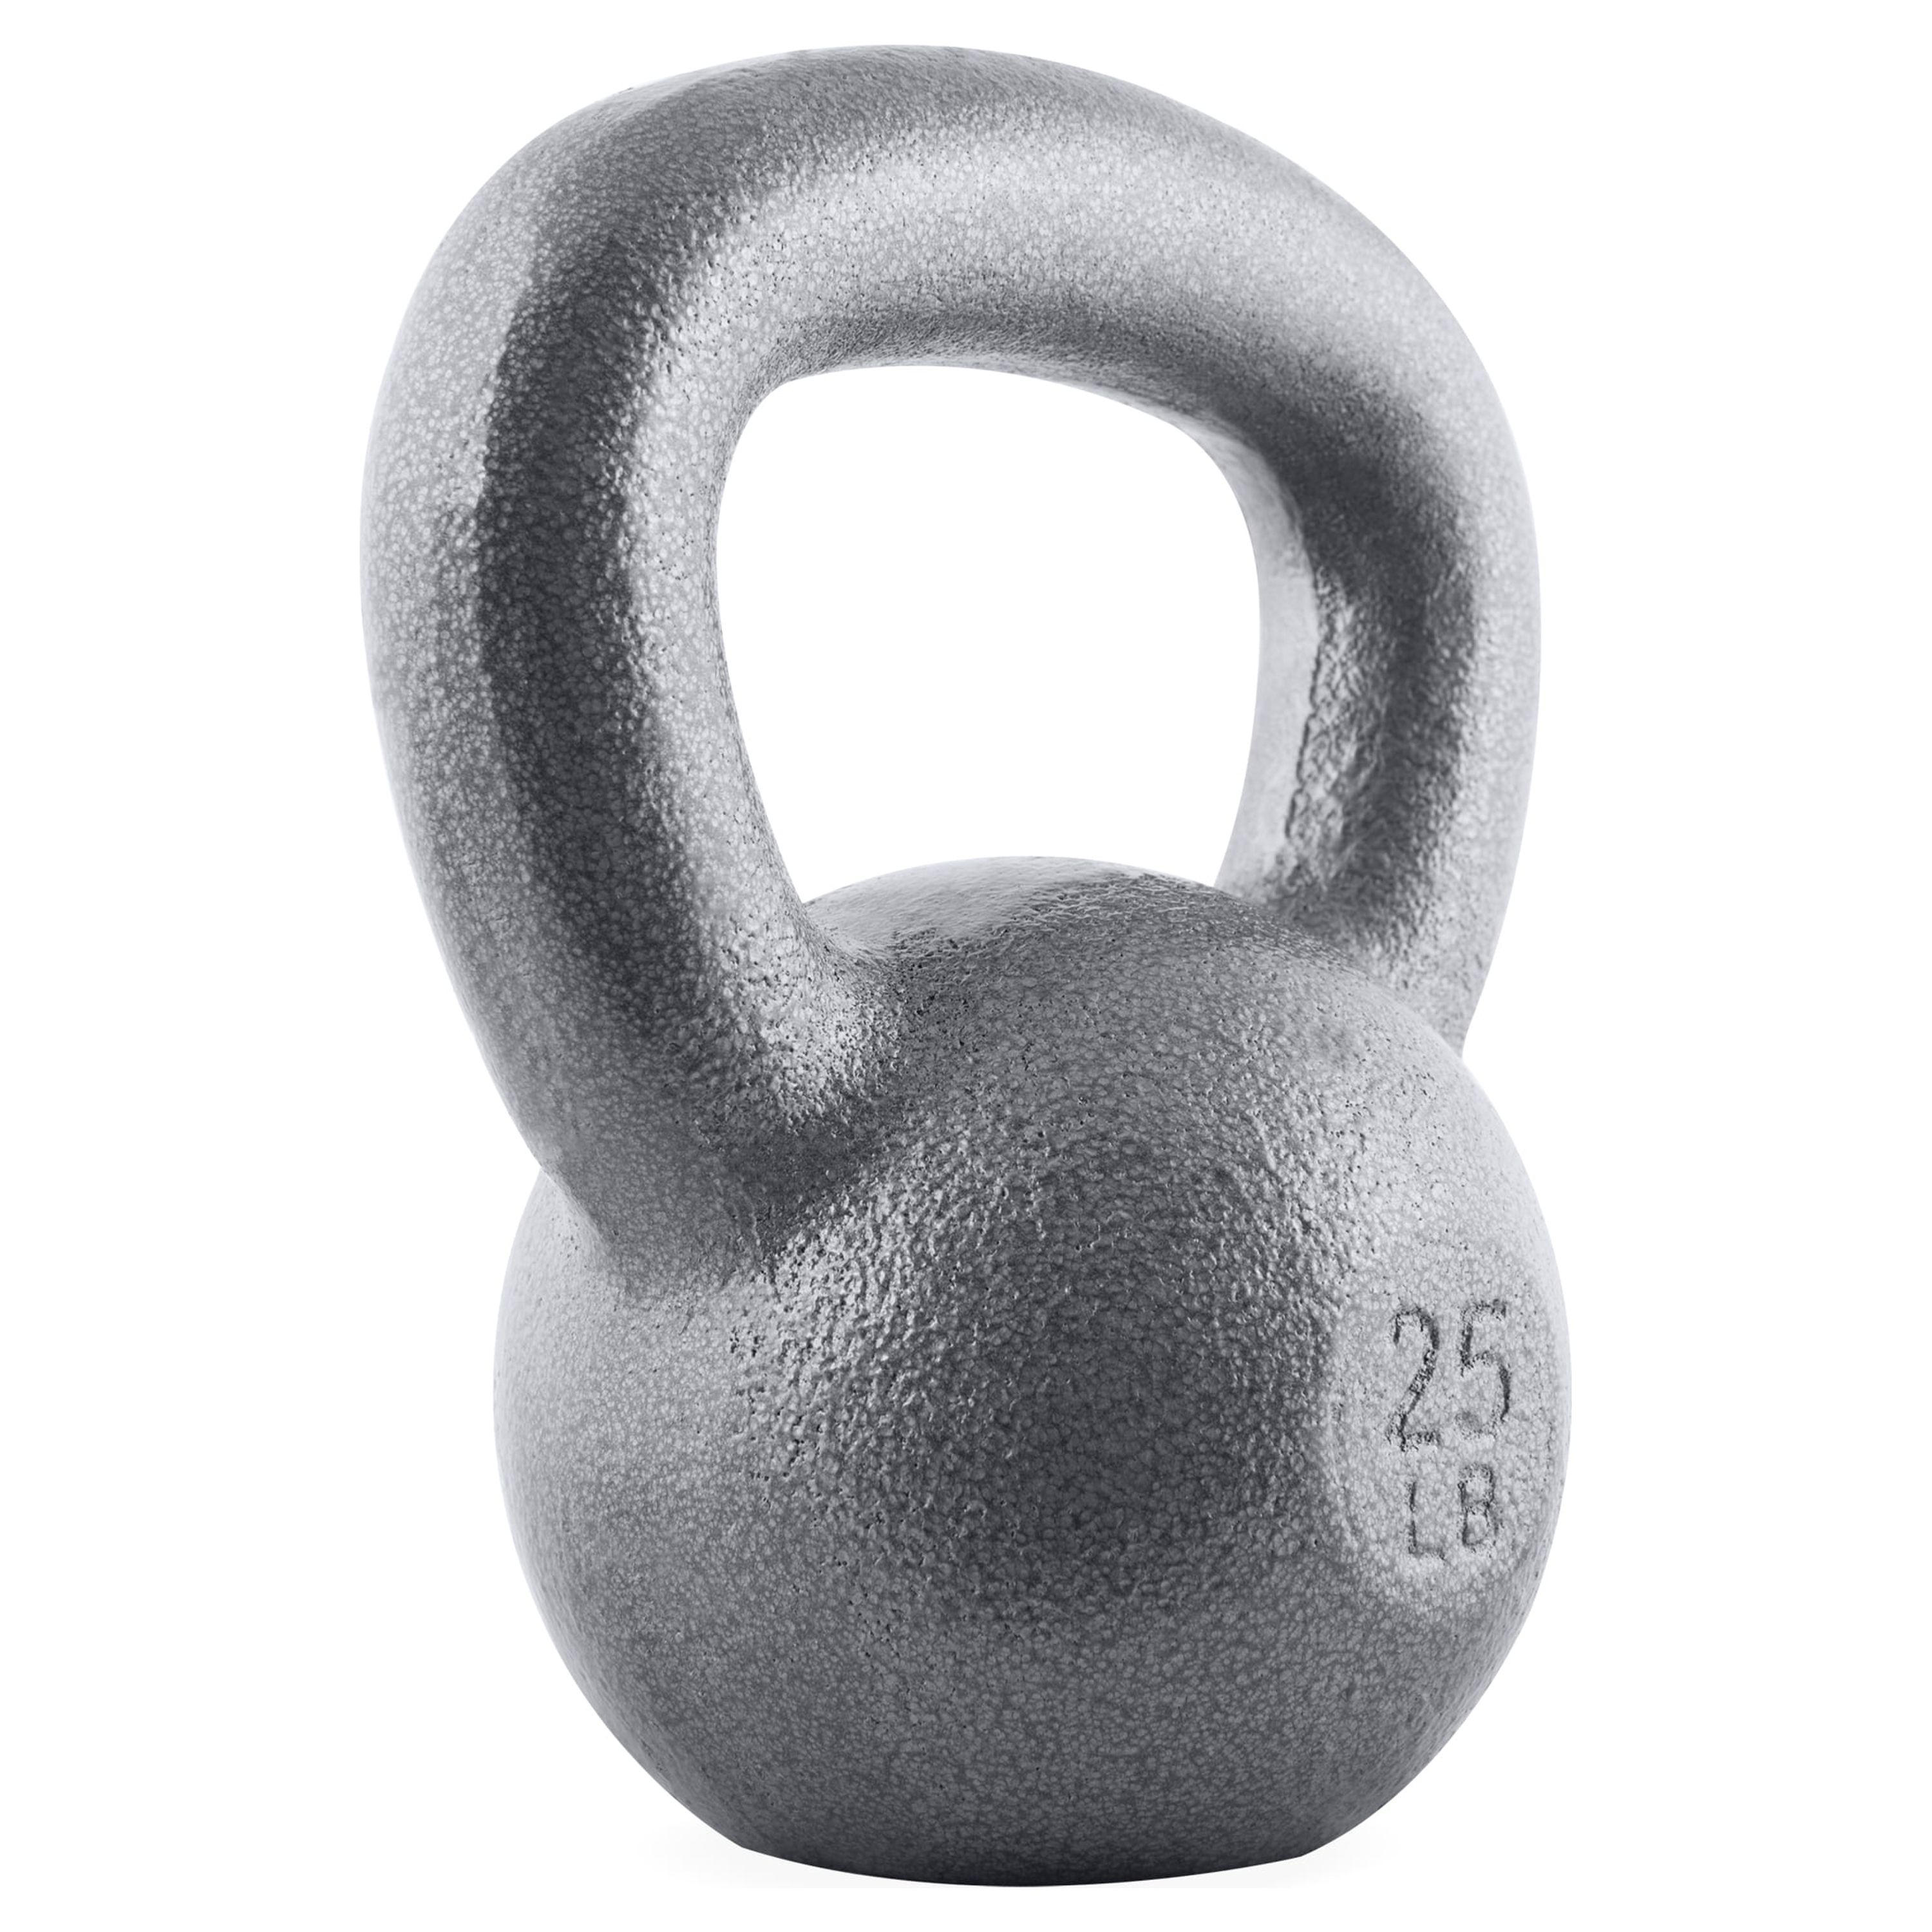 CAP Barbell Cast Iron Kettlebell, Single, 25-Pounds - image 3 of 7